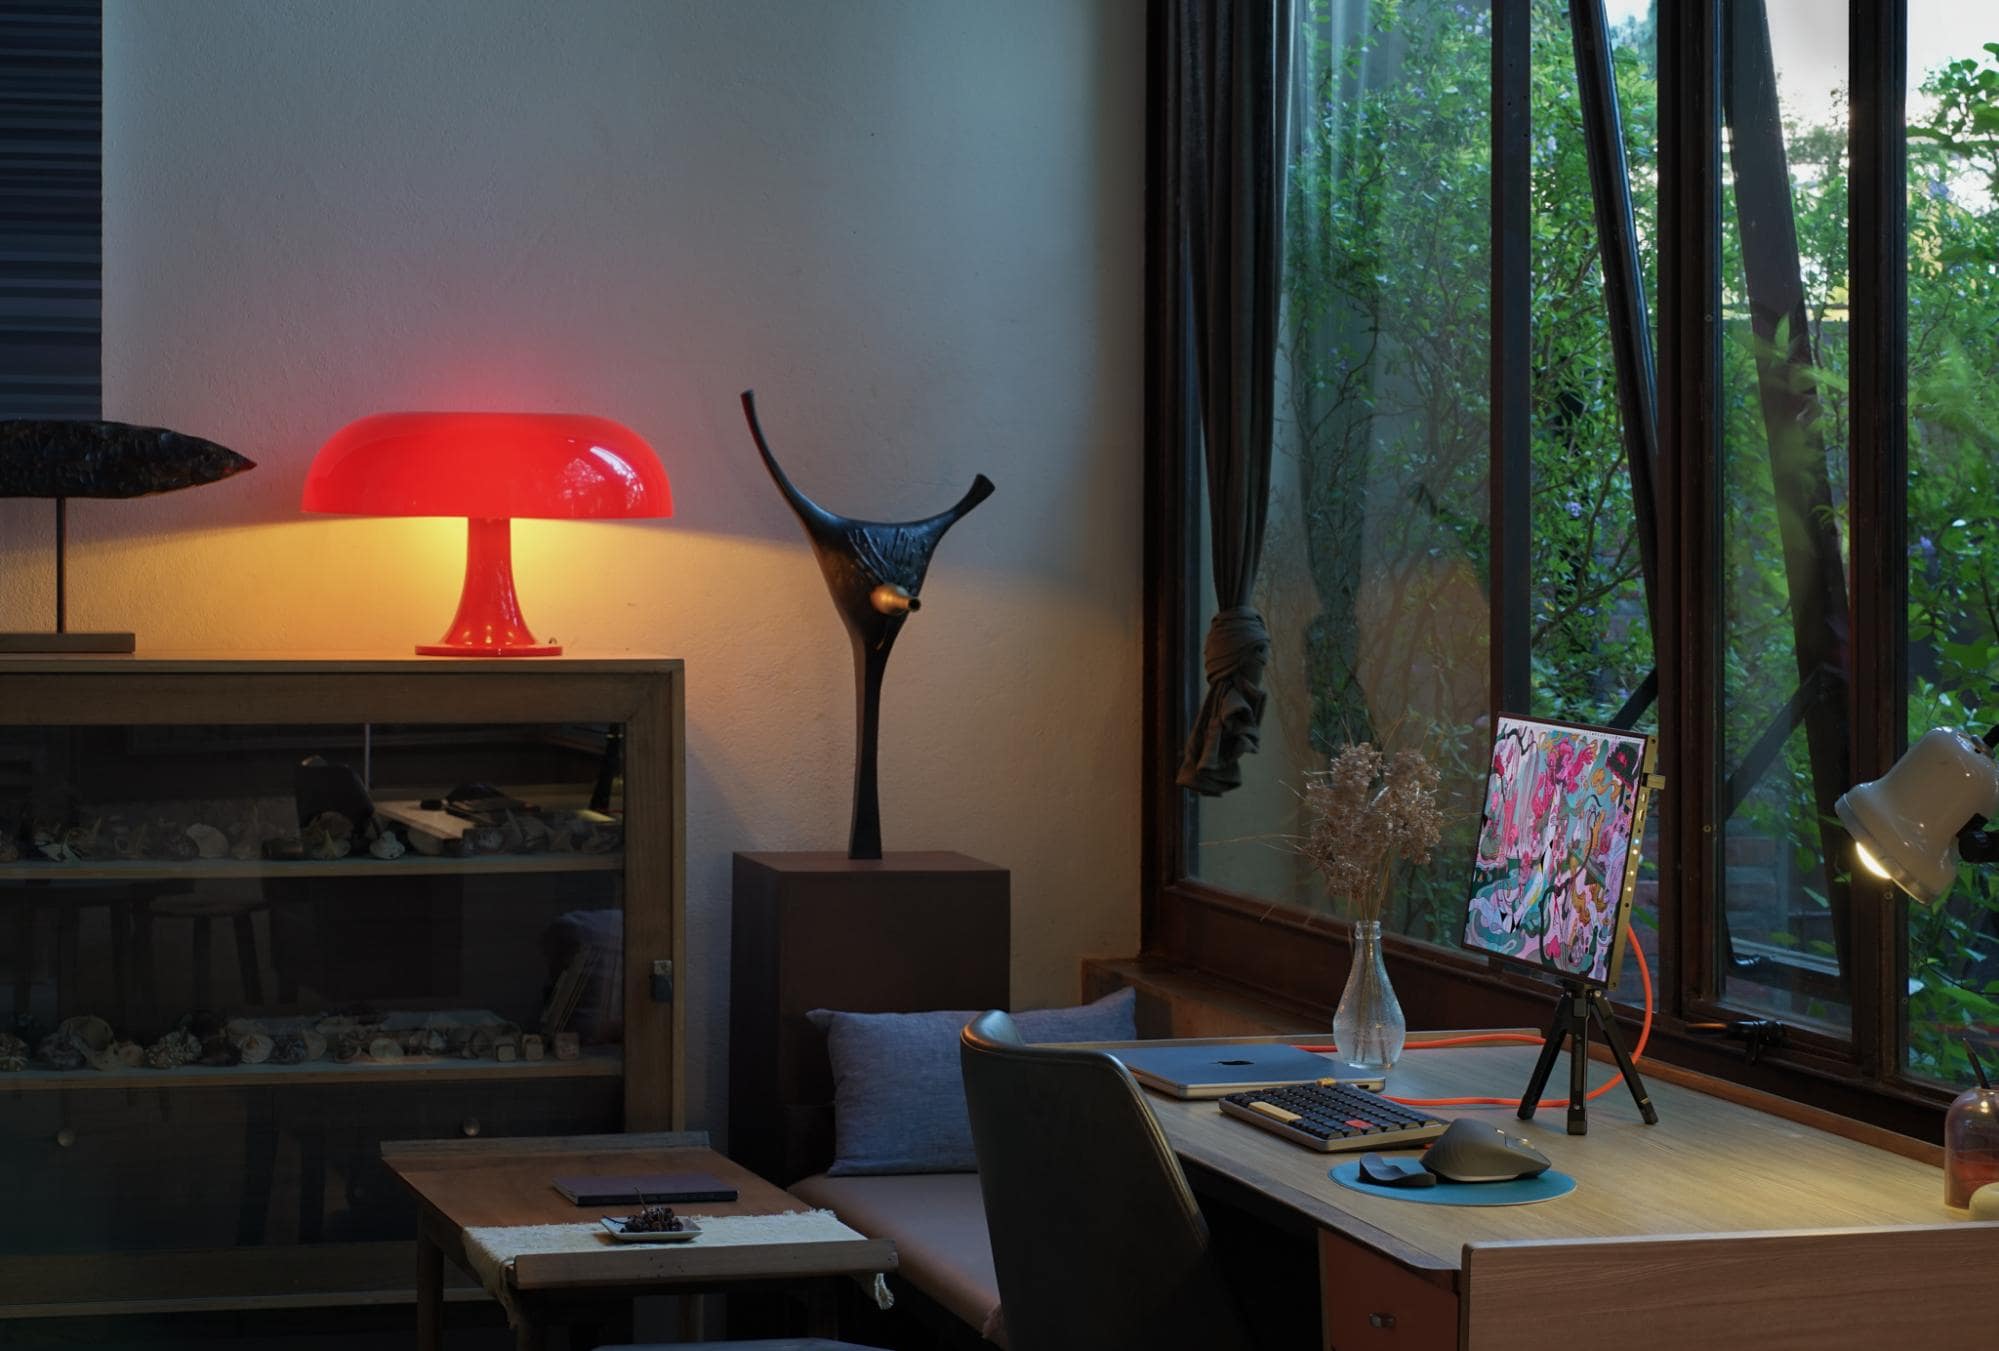 An intimate desk space bathed in the warm glow of a red table lamp, adjacent to a window with a view of lush foliage